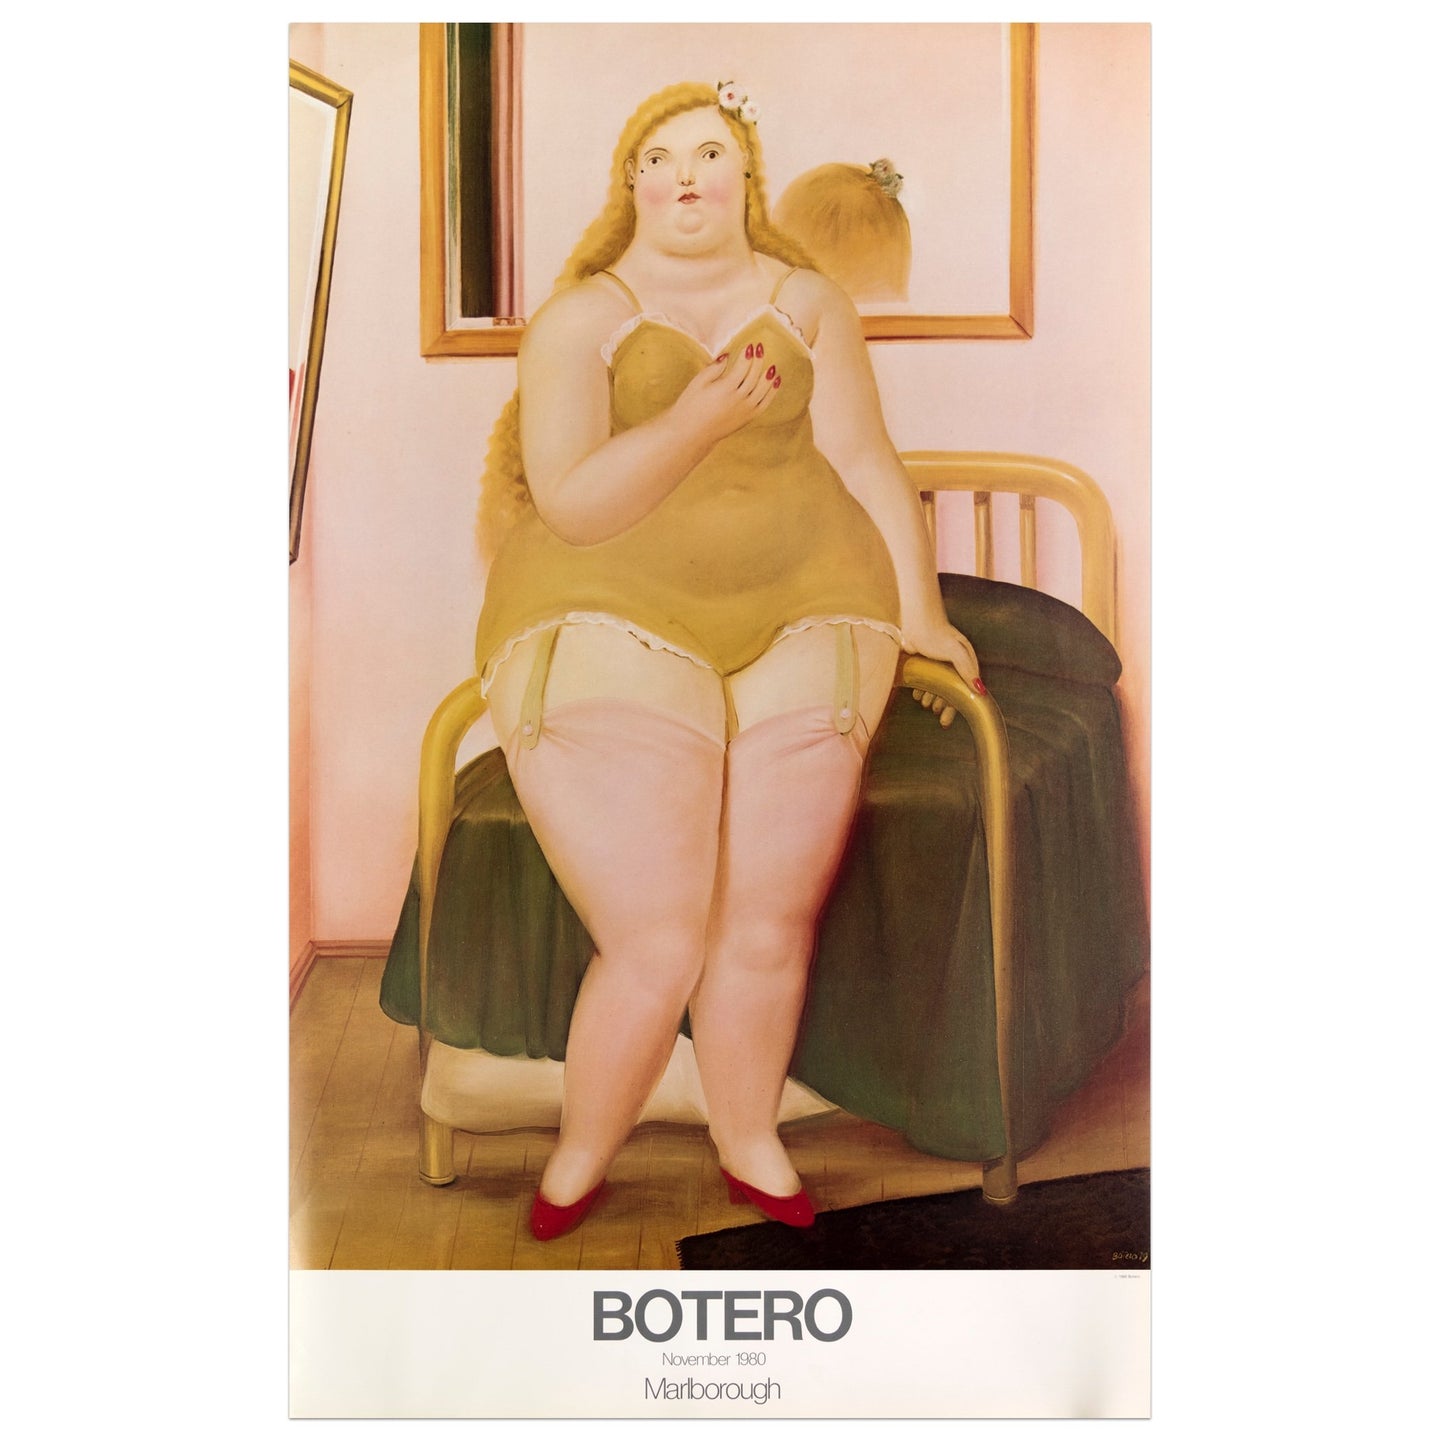 1980 Marlborough poster for Botero featuring a woman standing in gold lingerie in front of a bed 